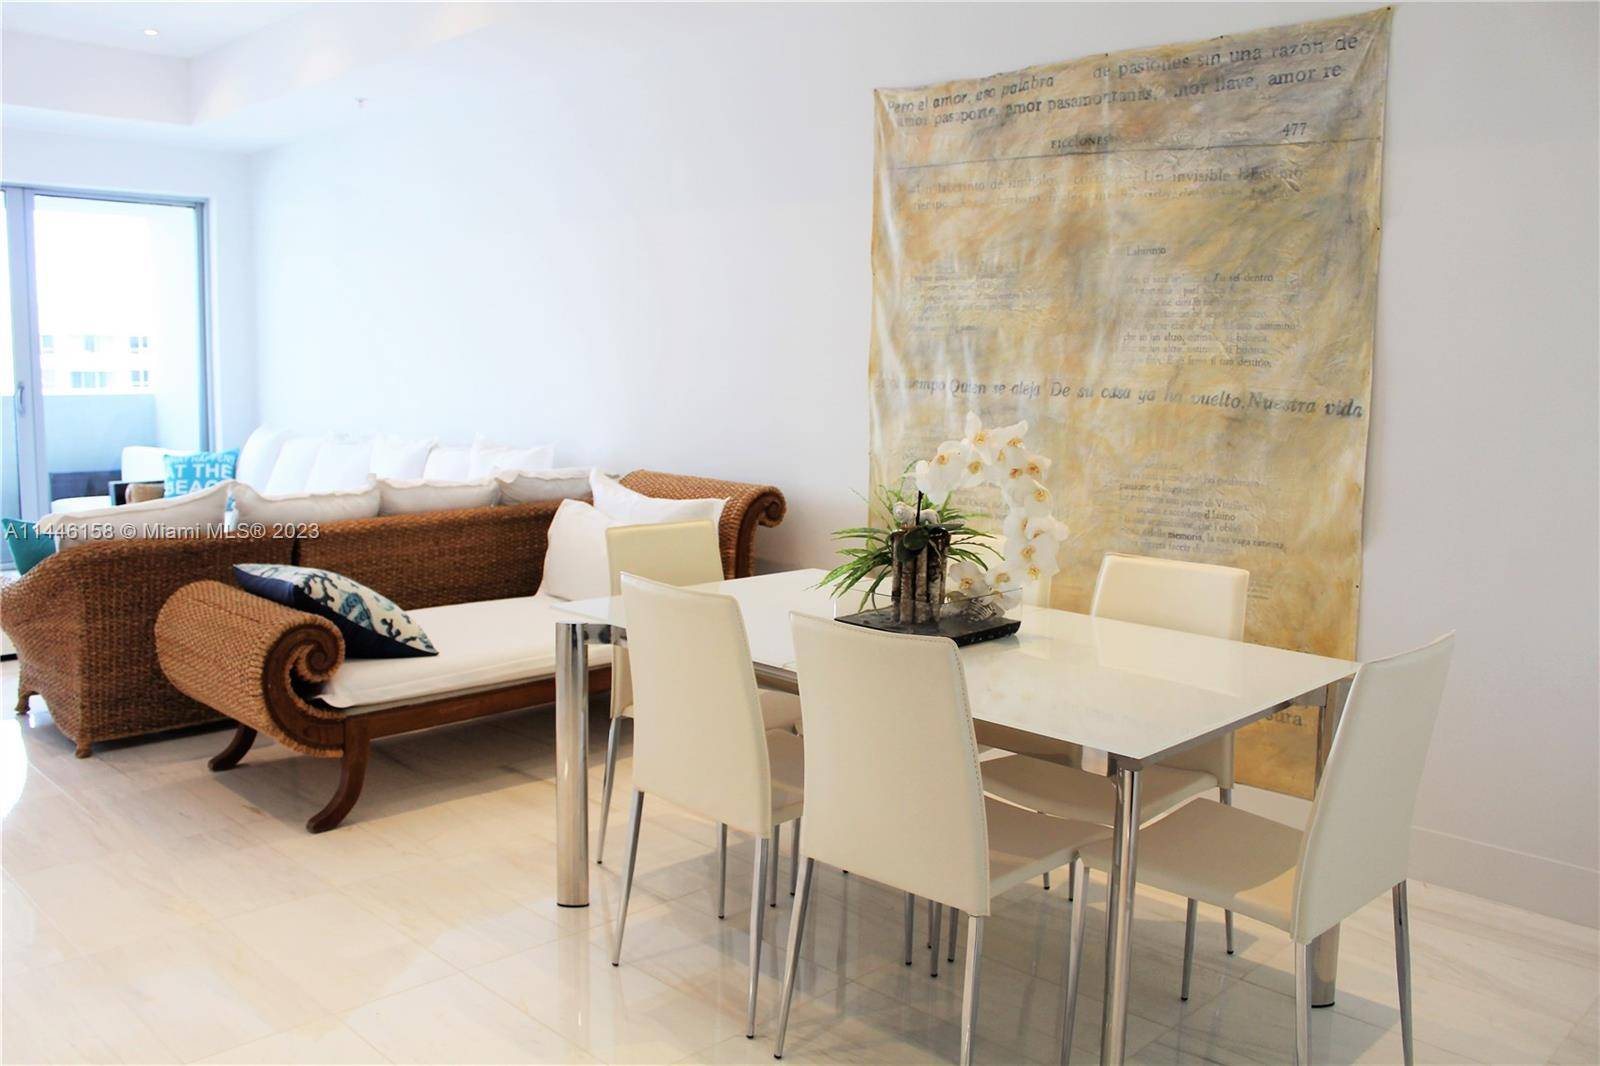 Penthouse unit tastefully furnished with marvelous bay and garden views at Flamingo Point.